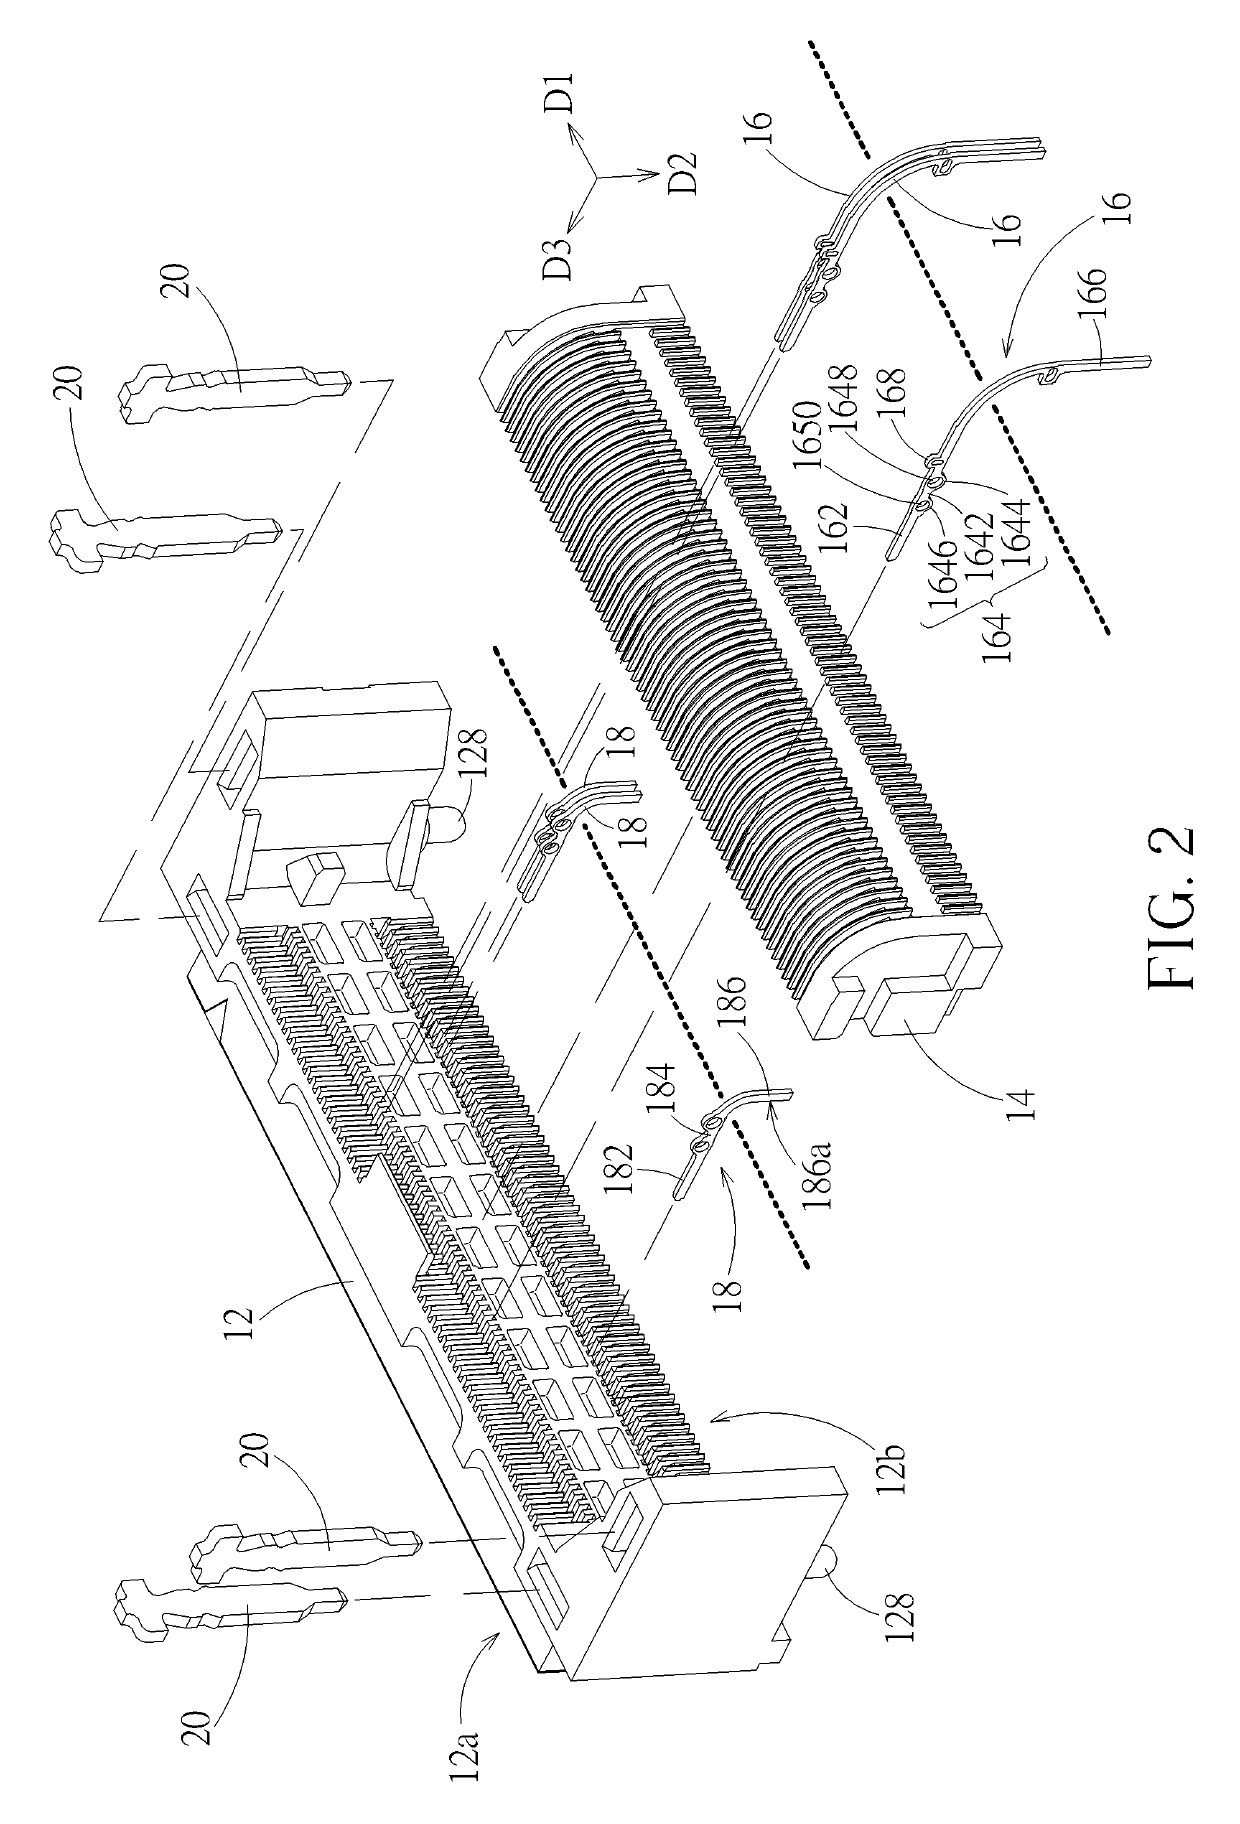 Electrical connector with internal terminals having opposite sides located from connector internal sidewalls